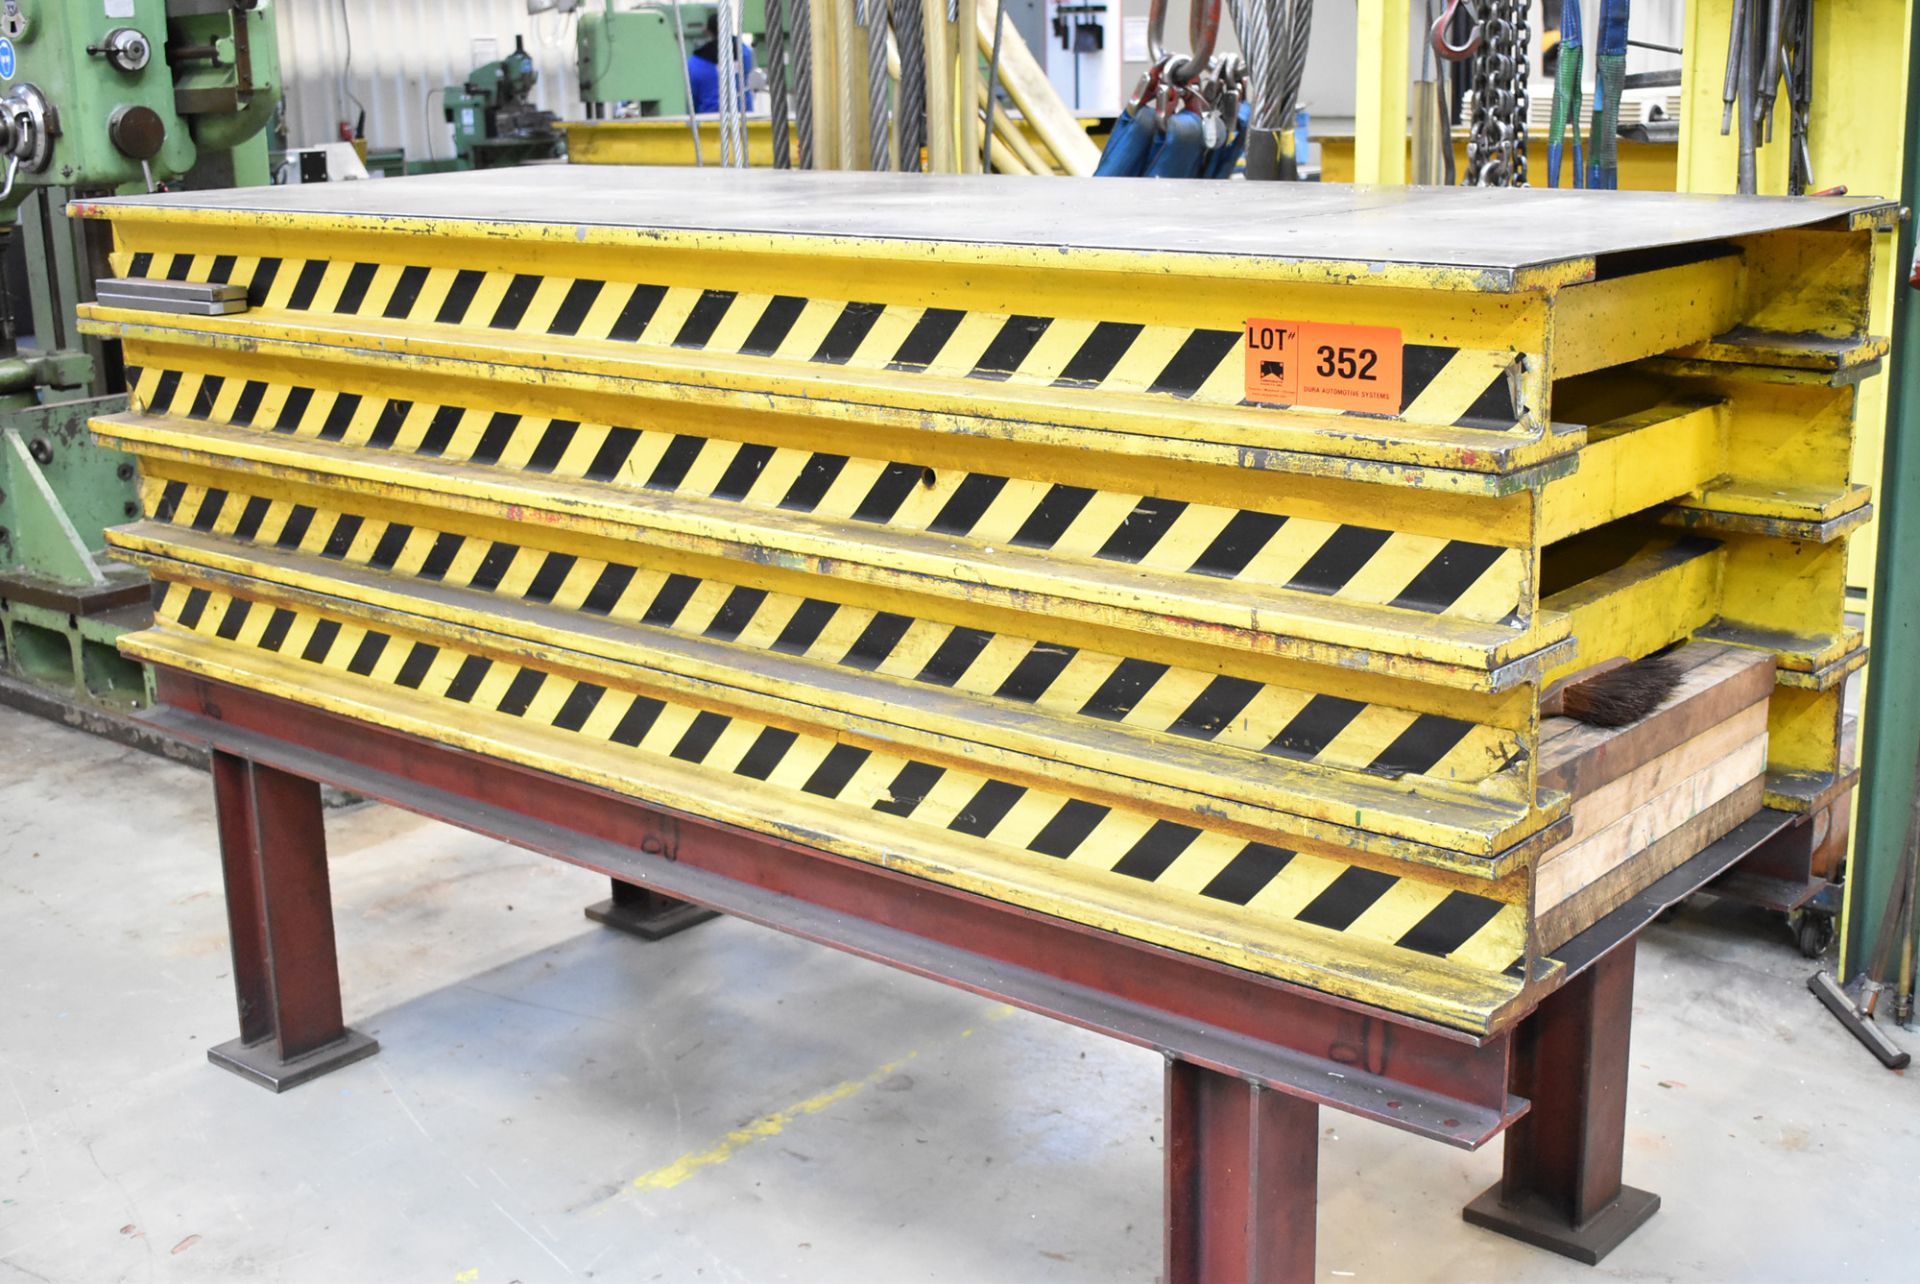 LOT/ (4) 2500 MM X 980 MM HEAVY DUTY DIE STANDS (BAU 55) [Removal Fee = € 27.50 + applicable VAT -